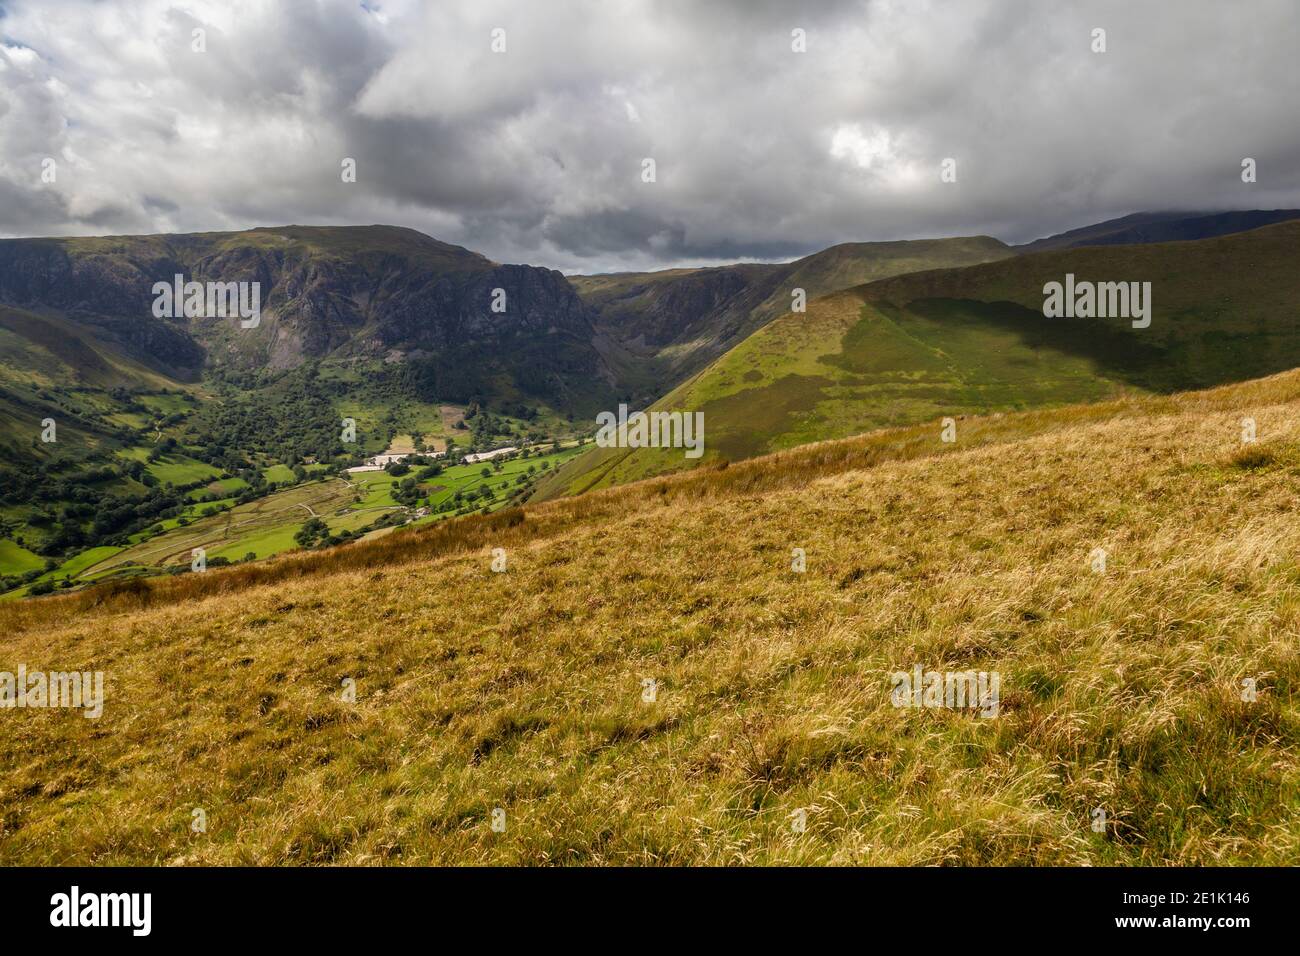 Aran Fawddwy and Cwm Cywarch viewed from the summit of Pen Yr Allt Uchaf, an area in the Snowdonia National Park' Wales Stock Photo